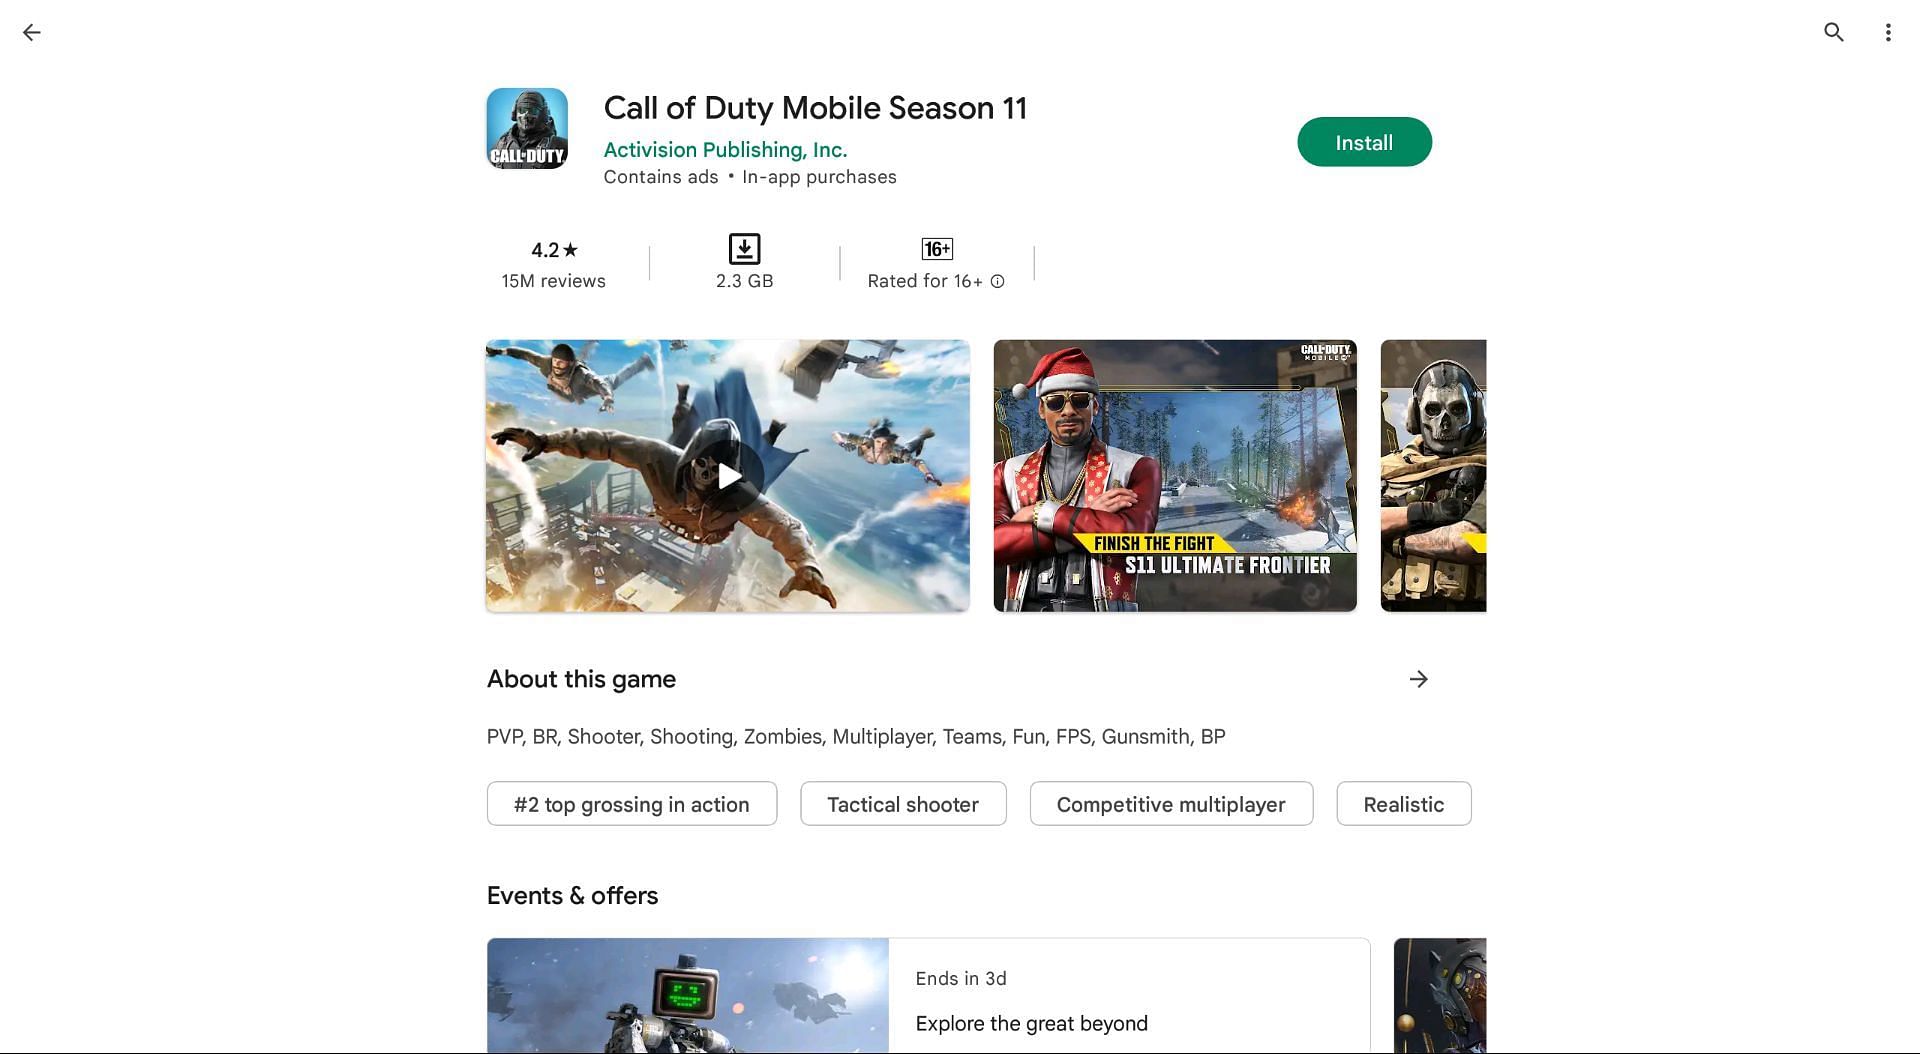 Call of Duty Mobile is available on Google Play Store (Image via Google Play Store)